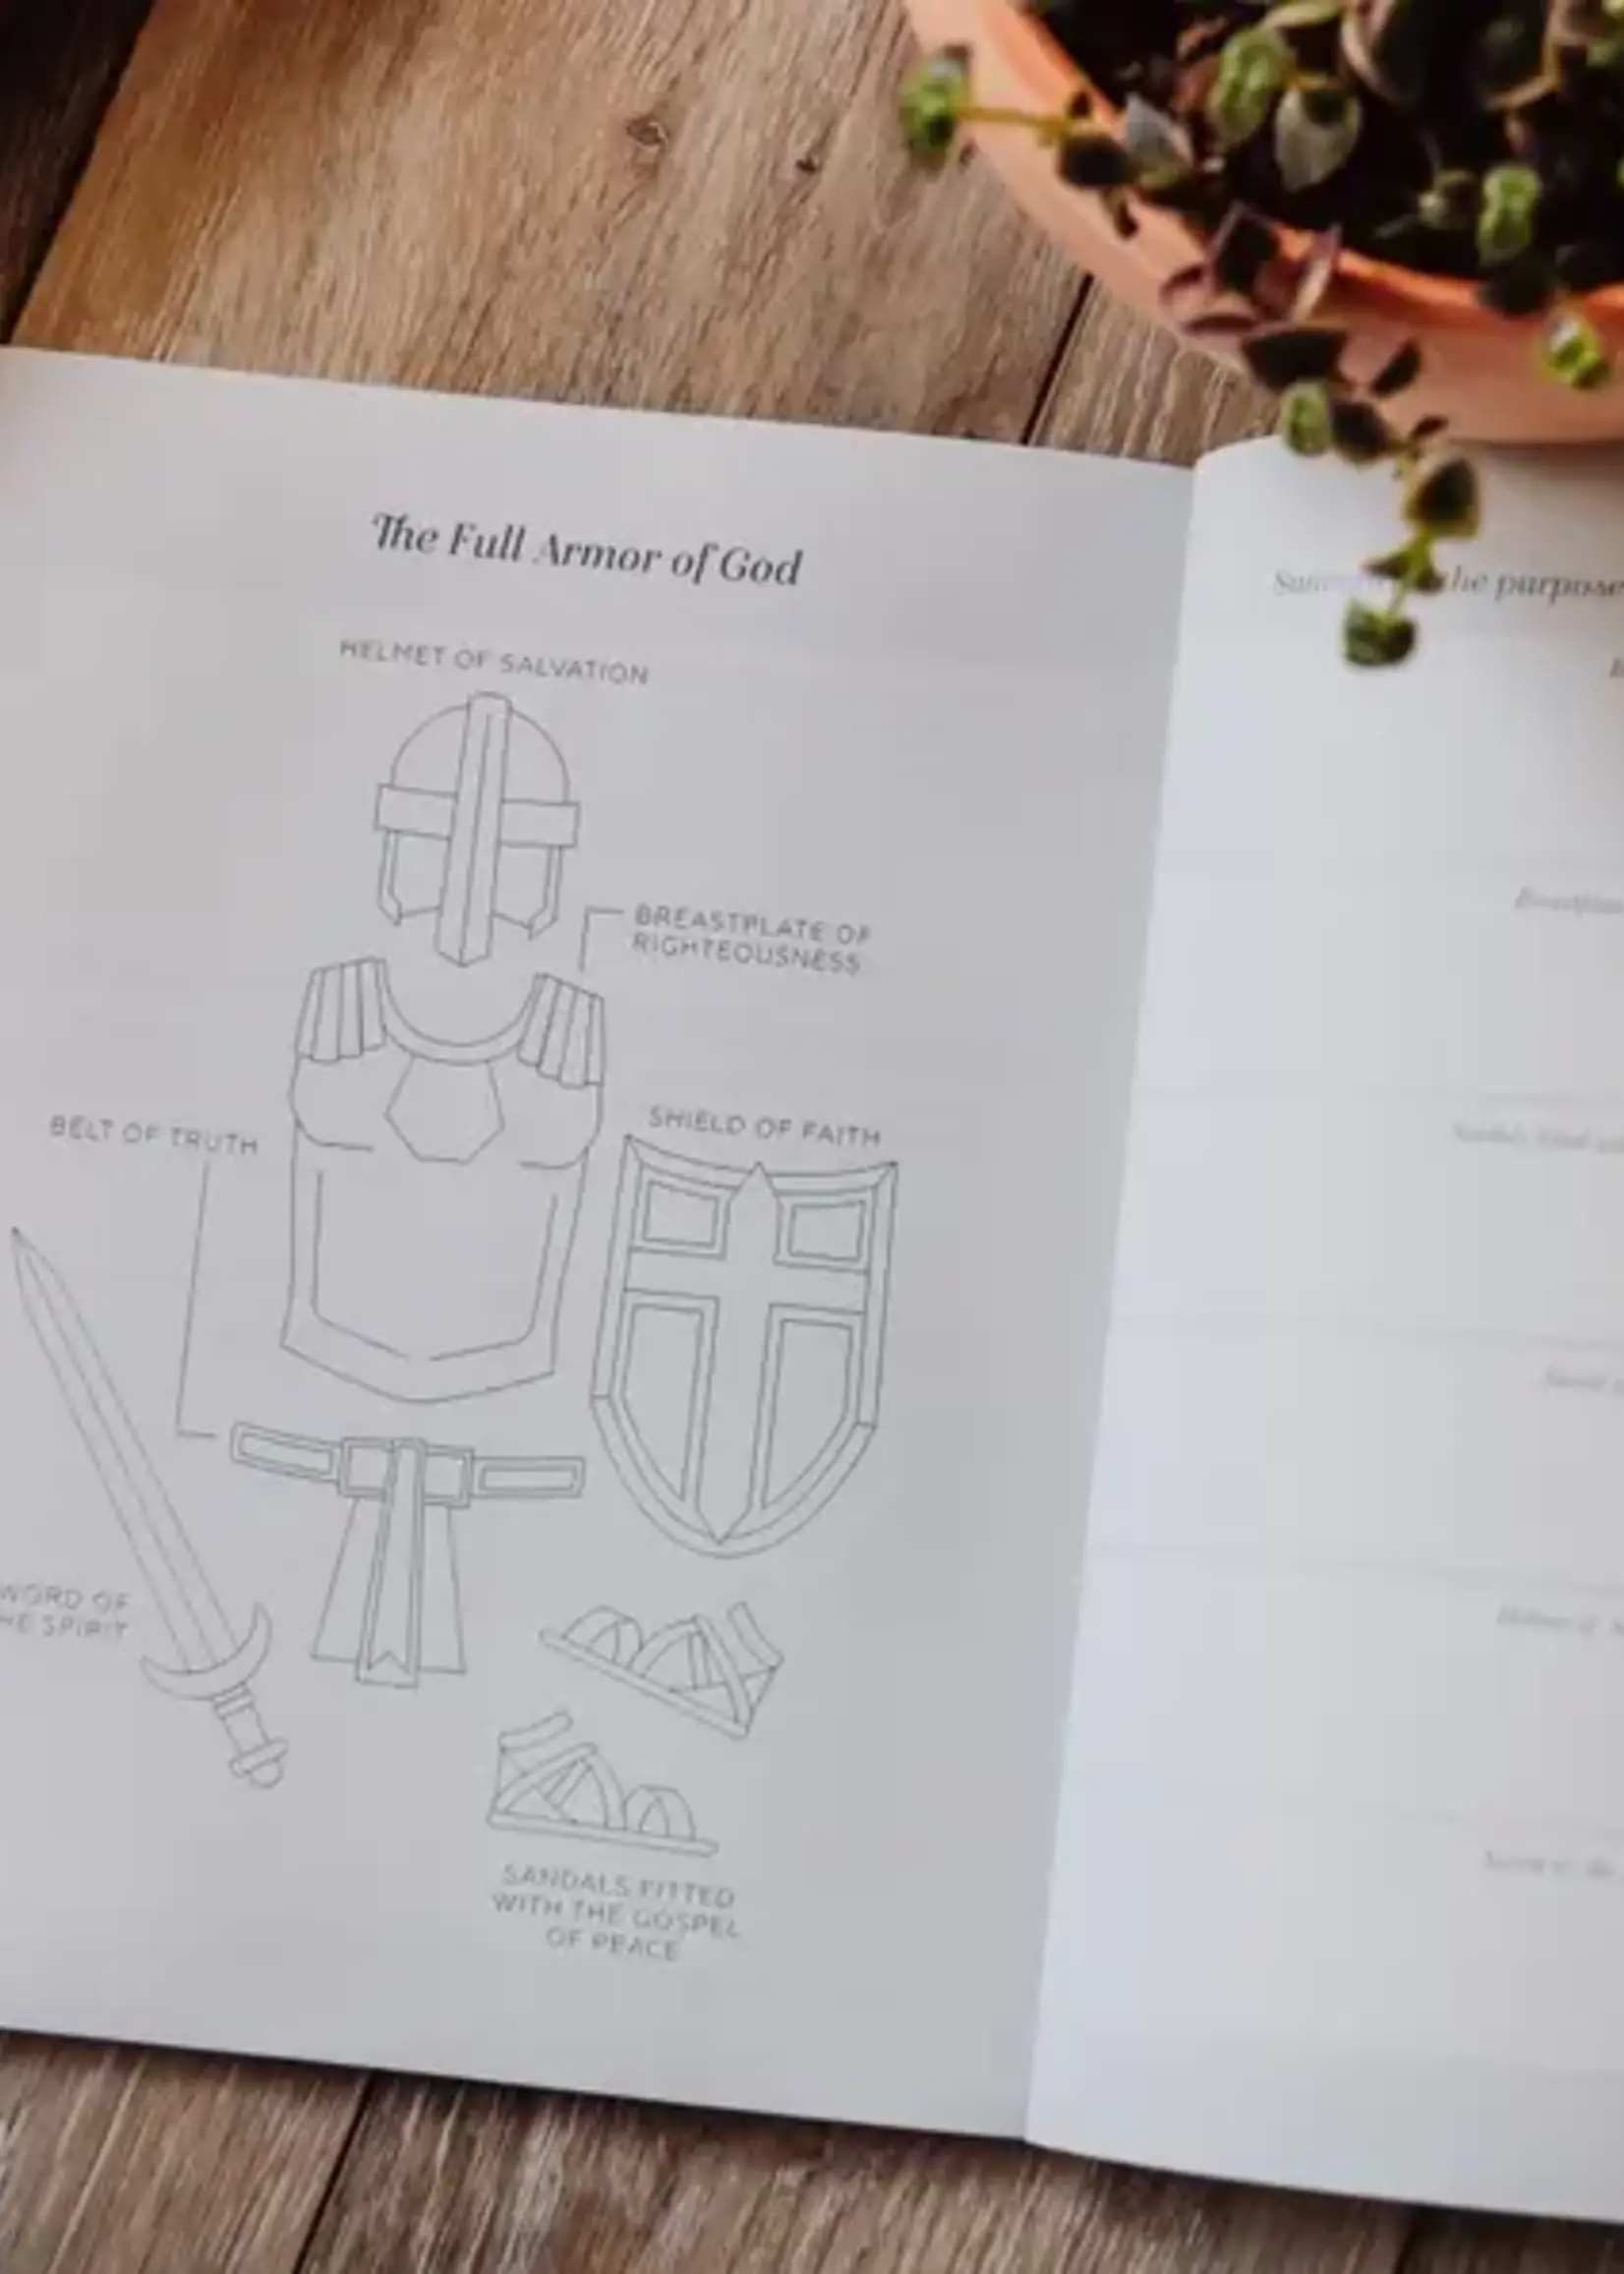 DAILY GRACE CO STAND FIRM: ARMOR OF GOD STUDY